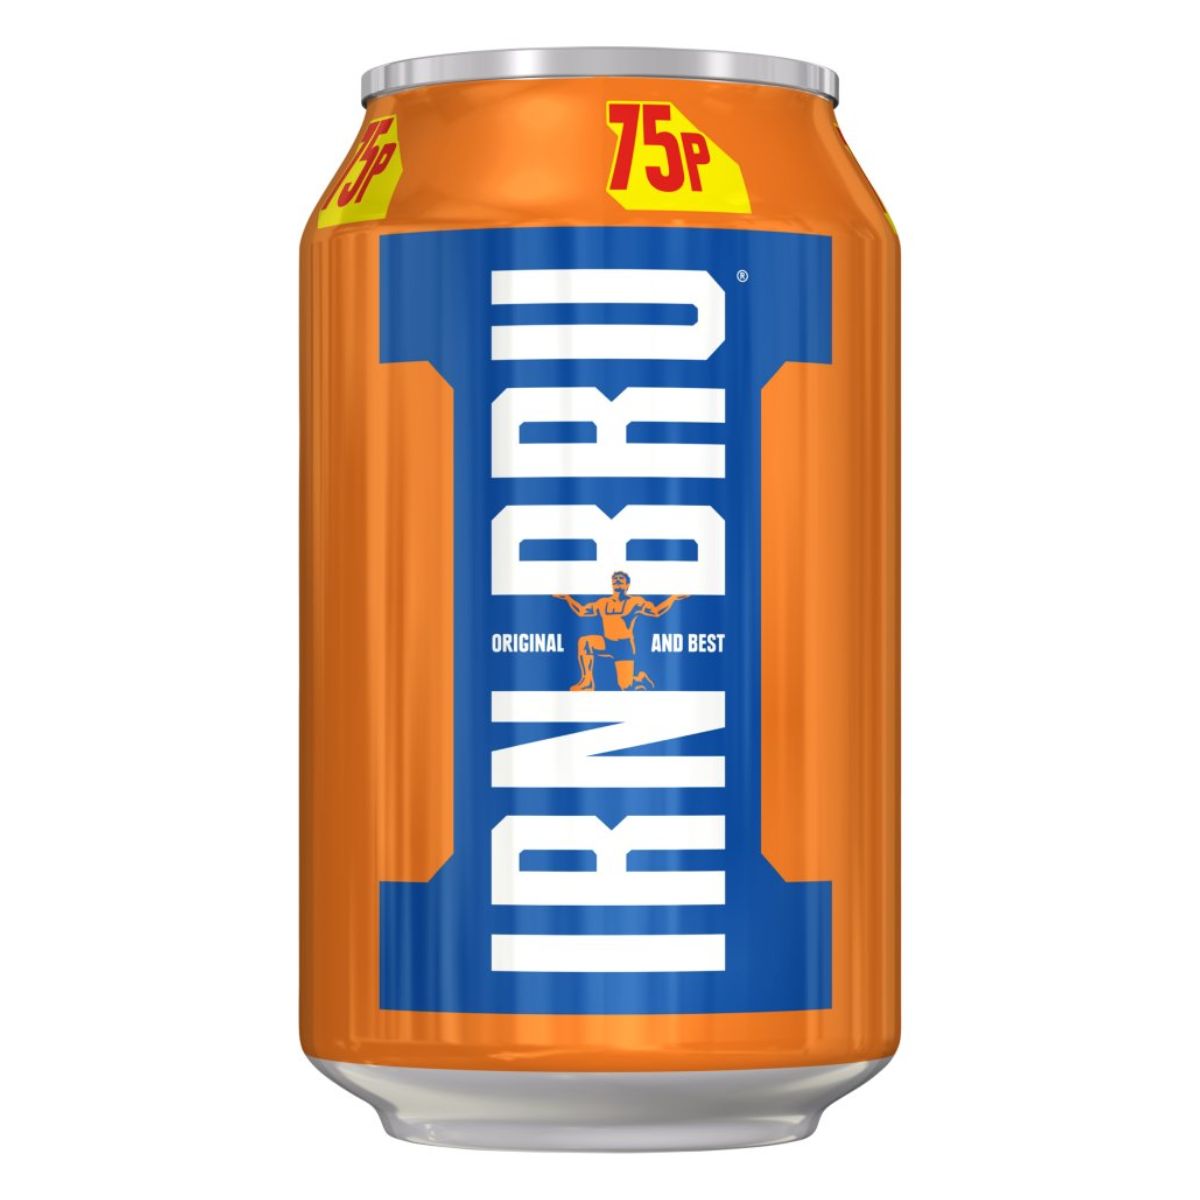 A 330ml can of Irn Bru - Original - 330ml with an eye-catching orange and blue design, priced at 75p, showcasing the slogan "Original and Best" – the quintessential Scottish drink.